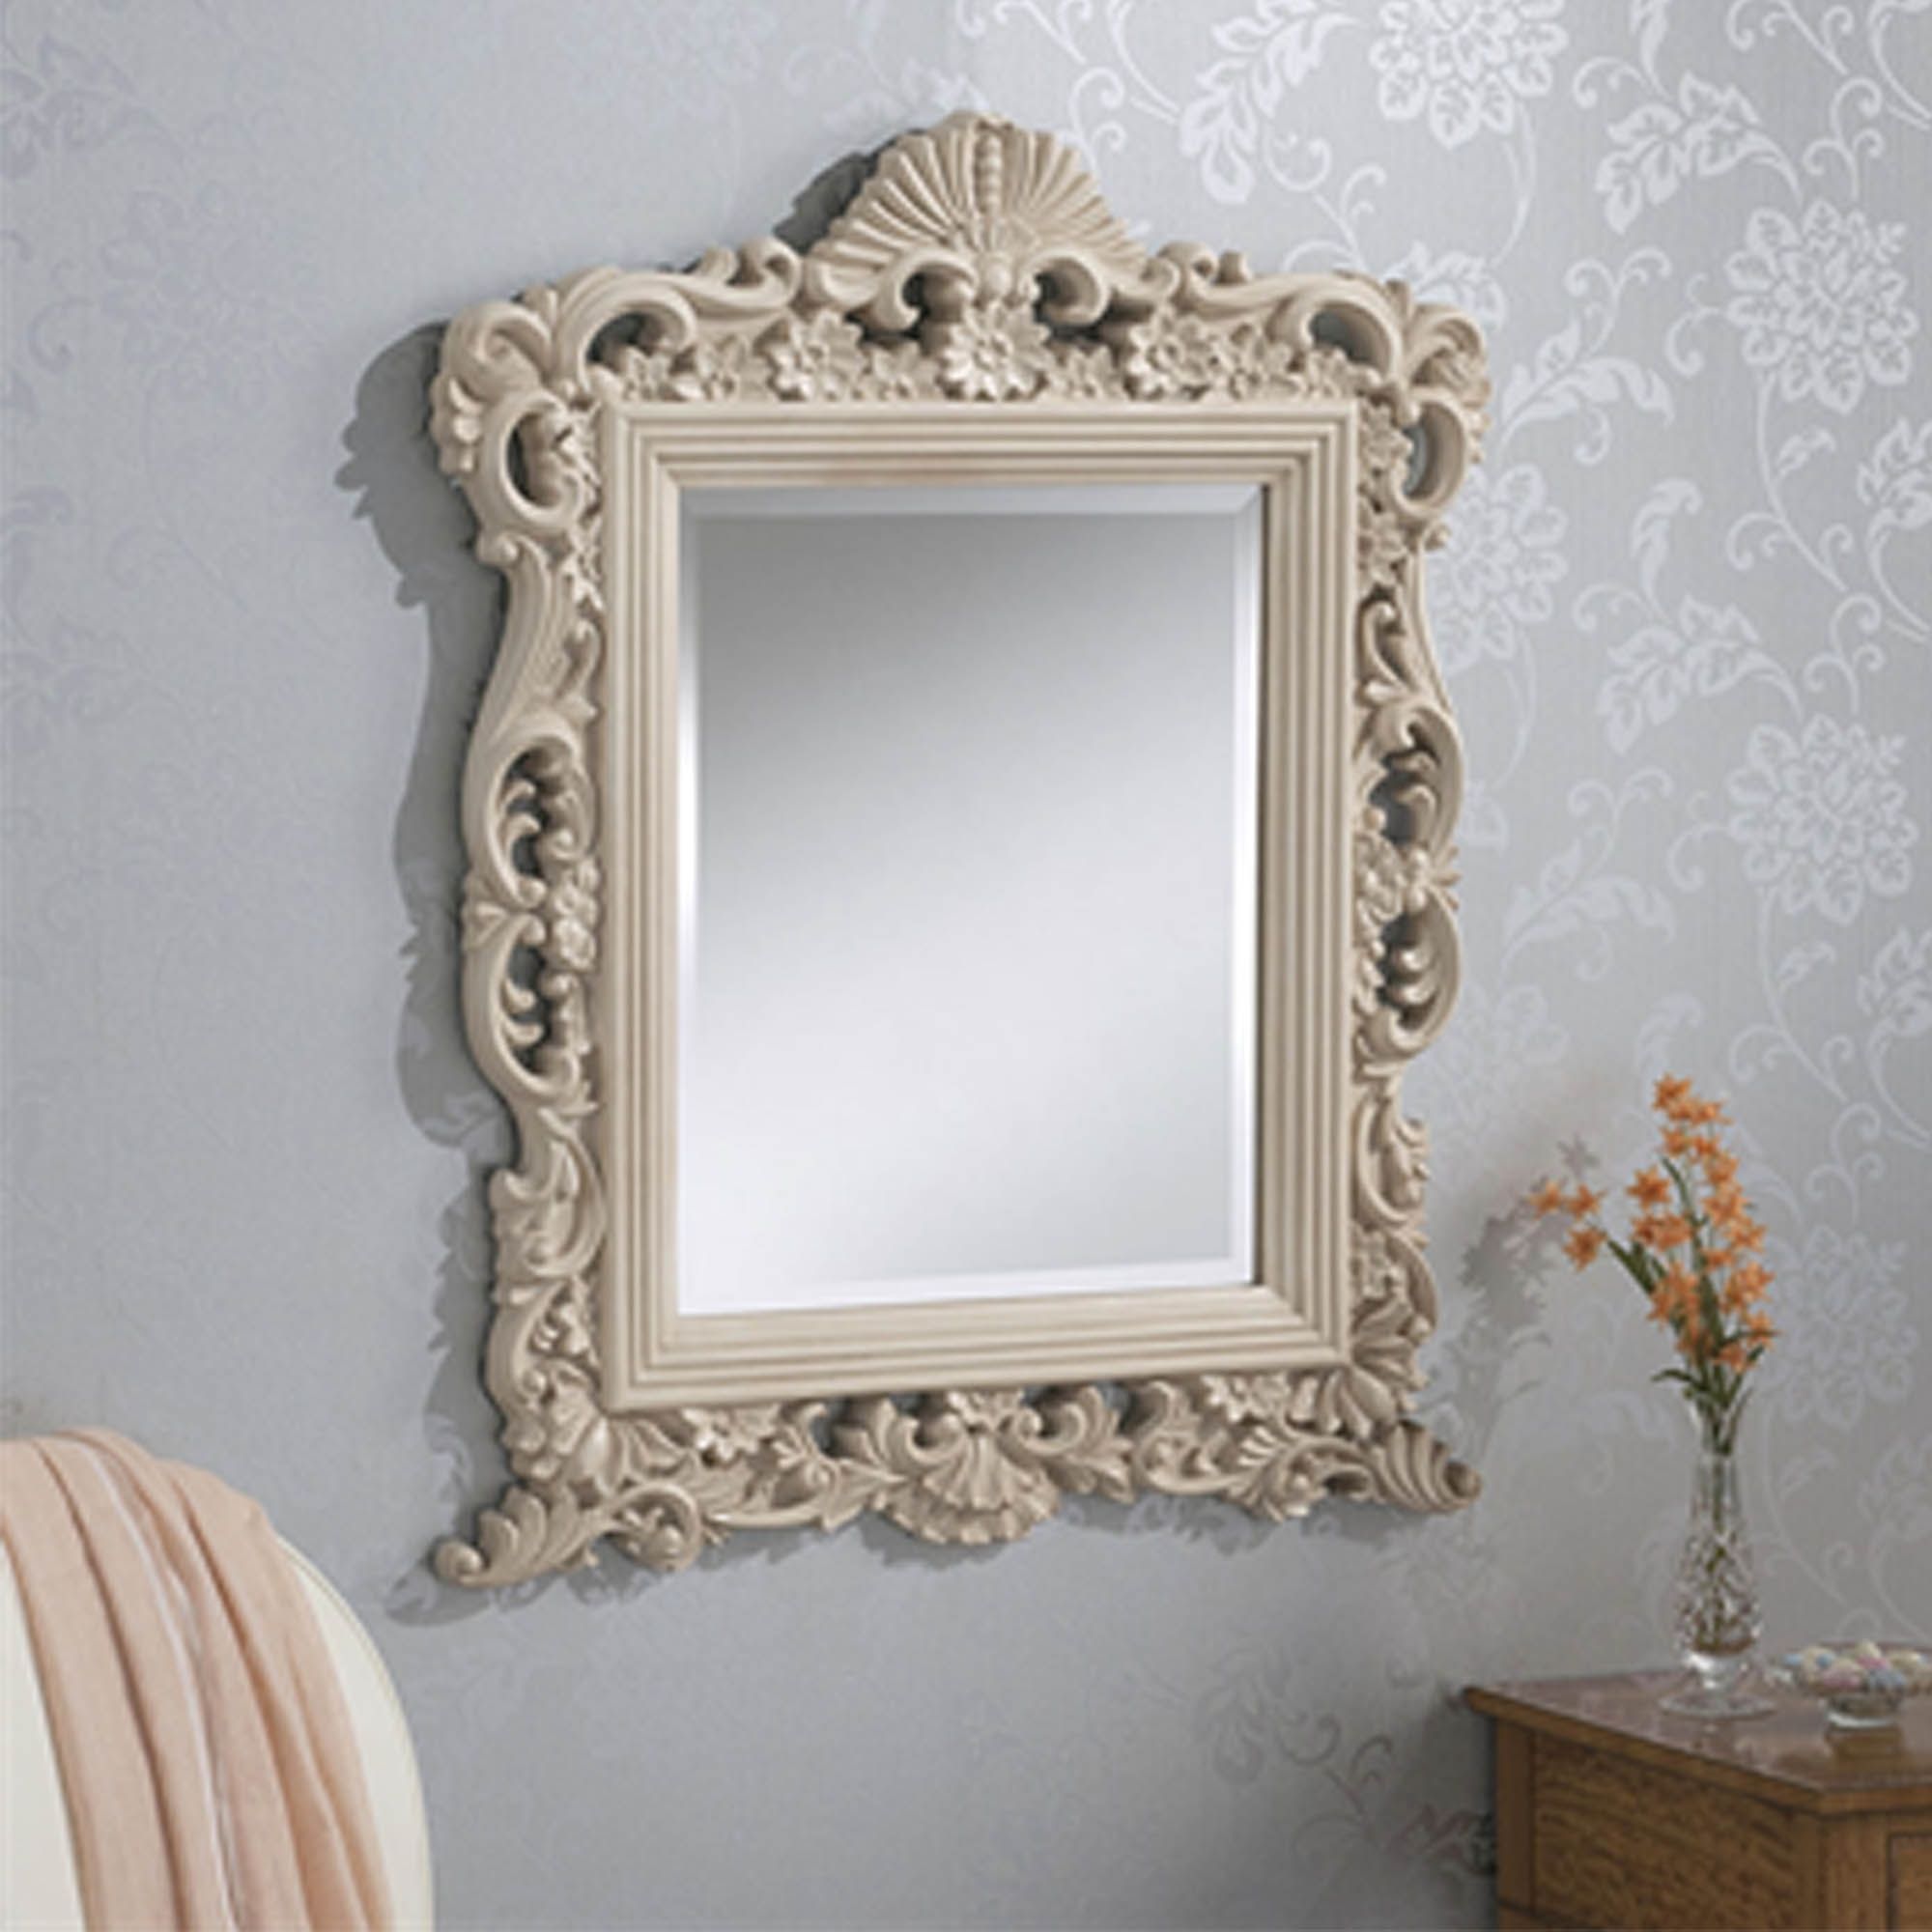 Decorative Antique French Style Ivory Ornate Wall Mirror | Hd365 In Booth Reclaimed Wall Mirrors Accent (View 9 of 15)